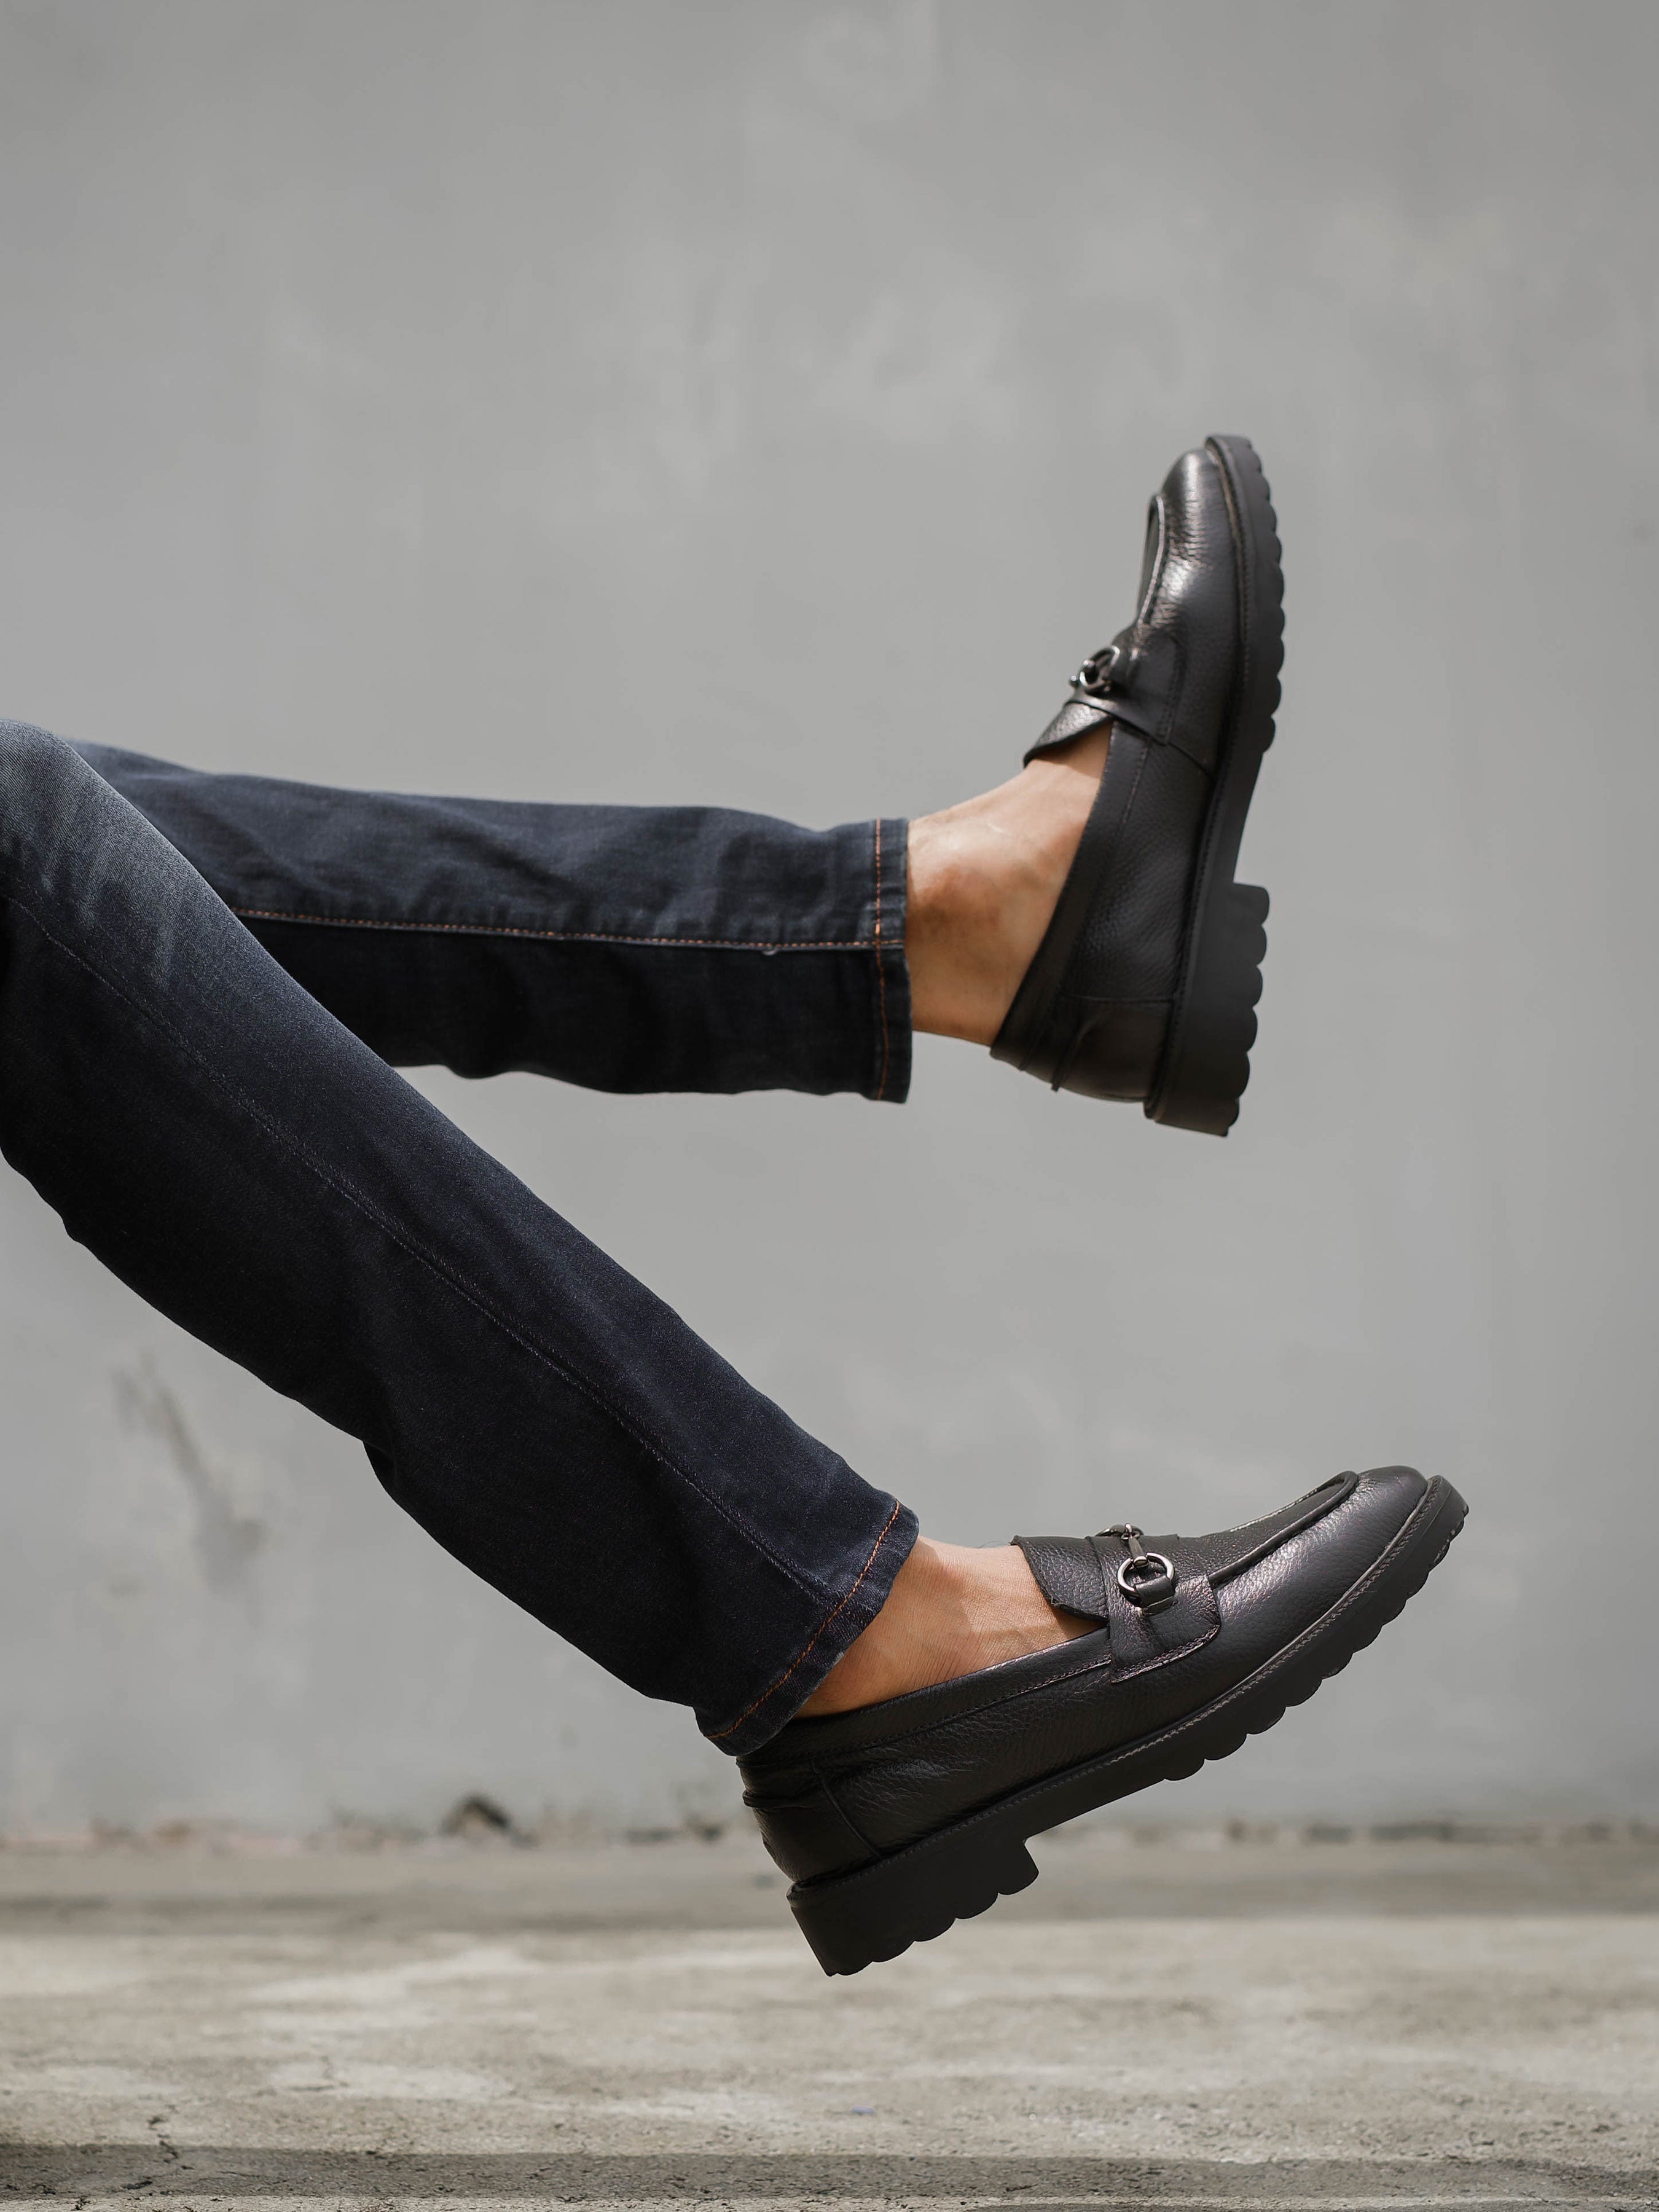 Men's flat shoes with handmade buckles in black calf leather